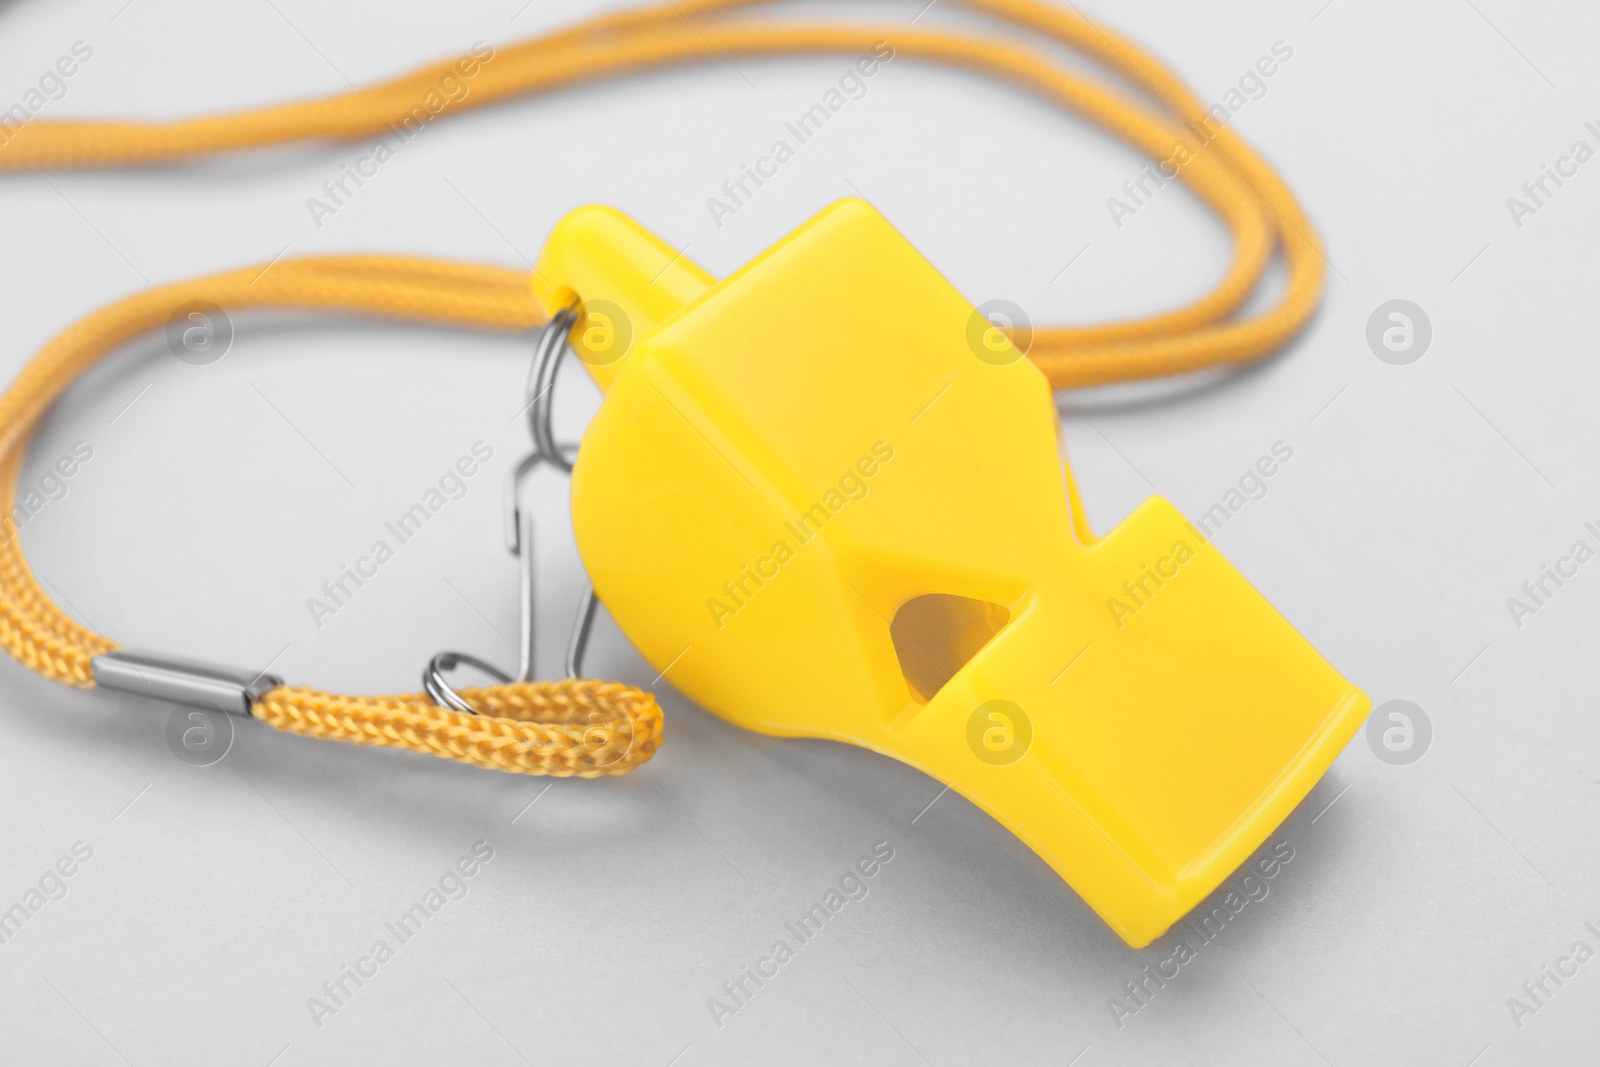 Photo of One yellow whistle with cord on white background, closeup